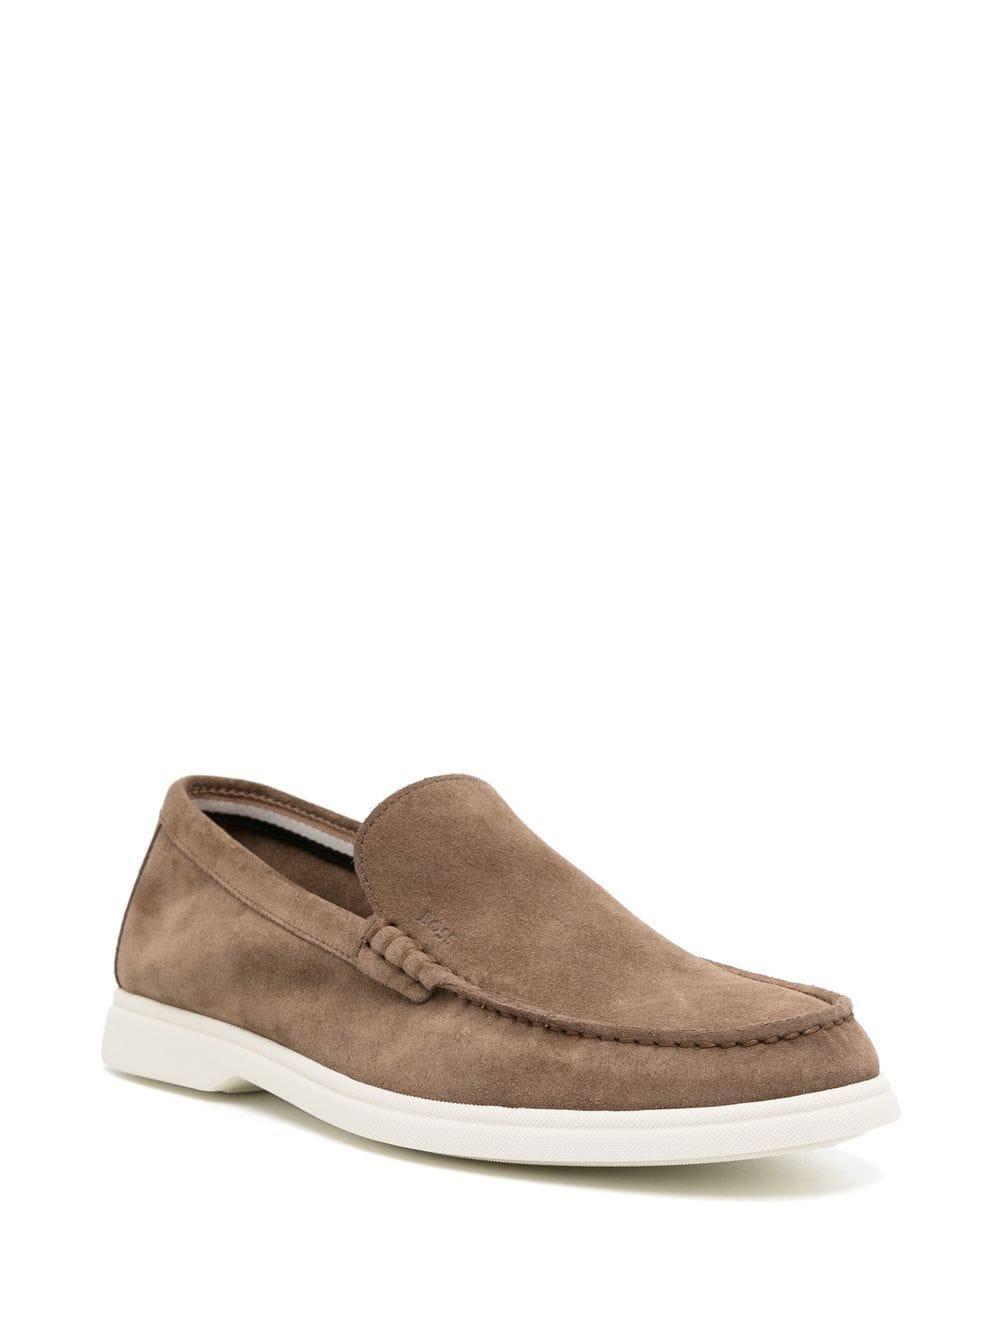 BOSS by HUGO BOSS Slip-on Suede Loafers in Brown for Men | Lyst